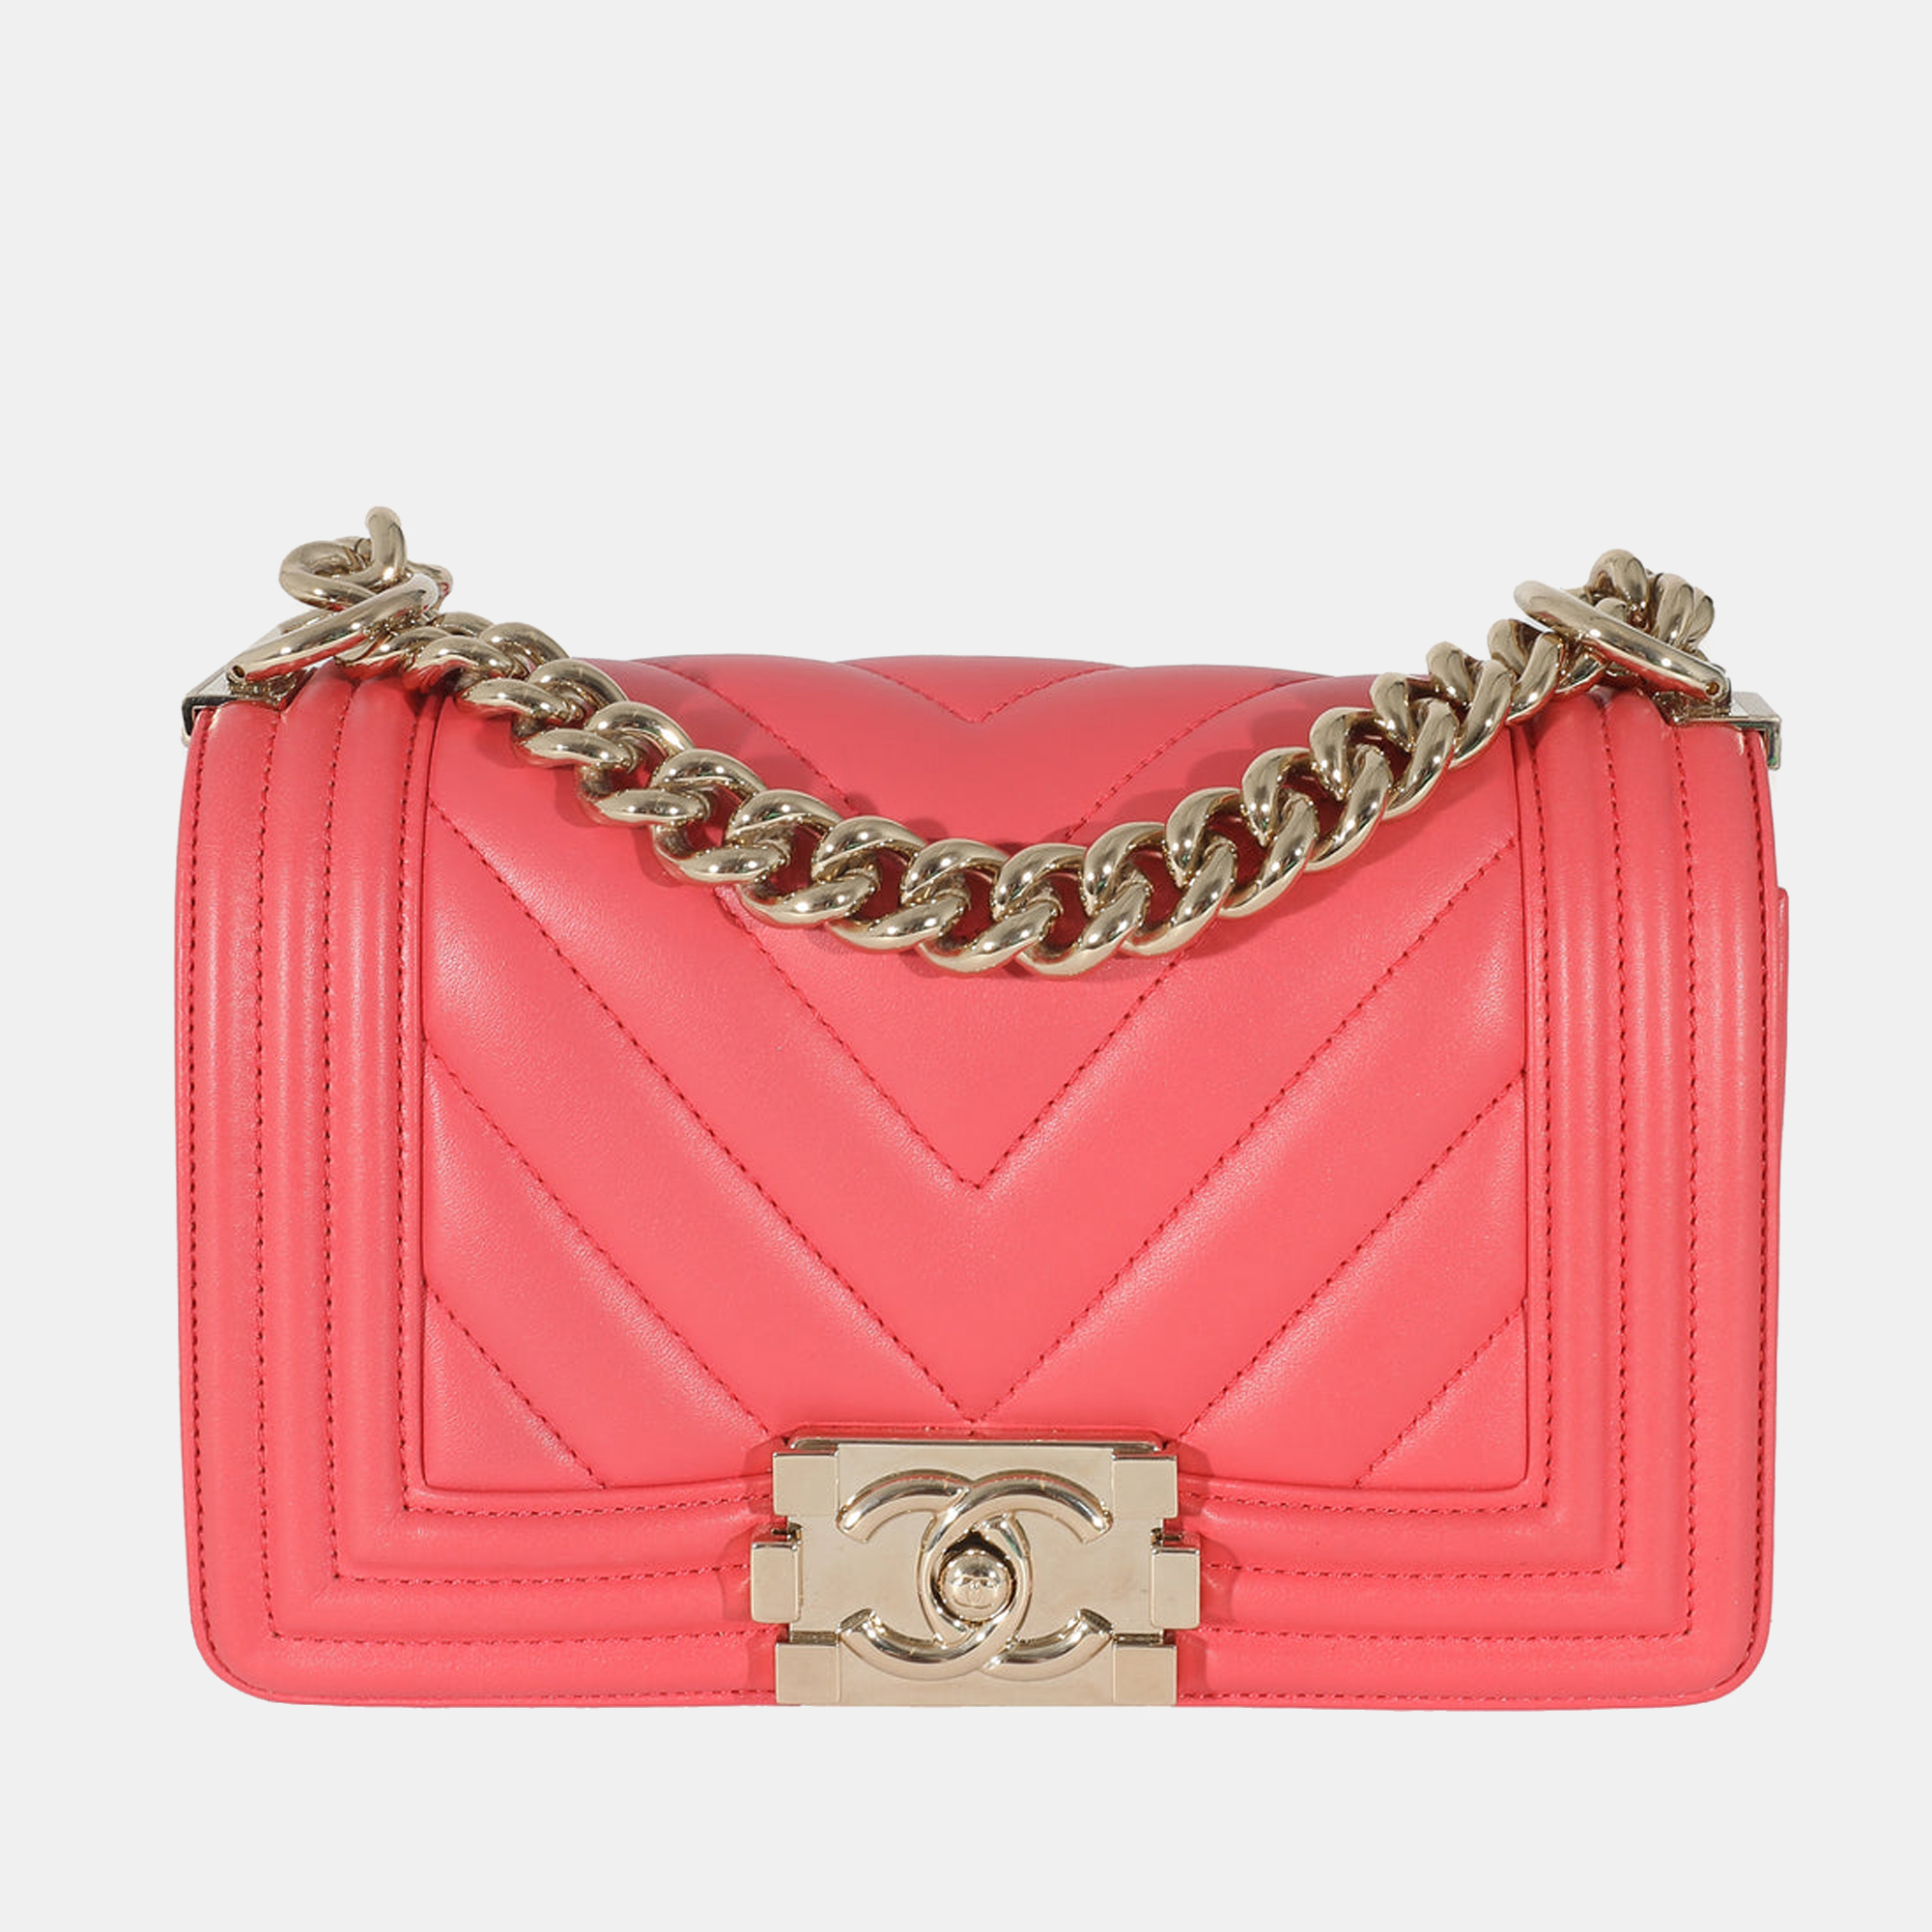 Chanel red chevron quilted small boy bag